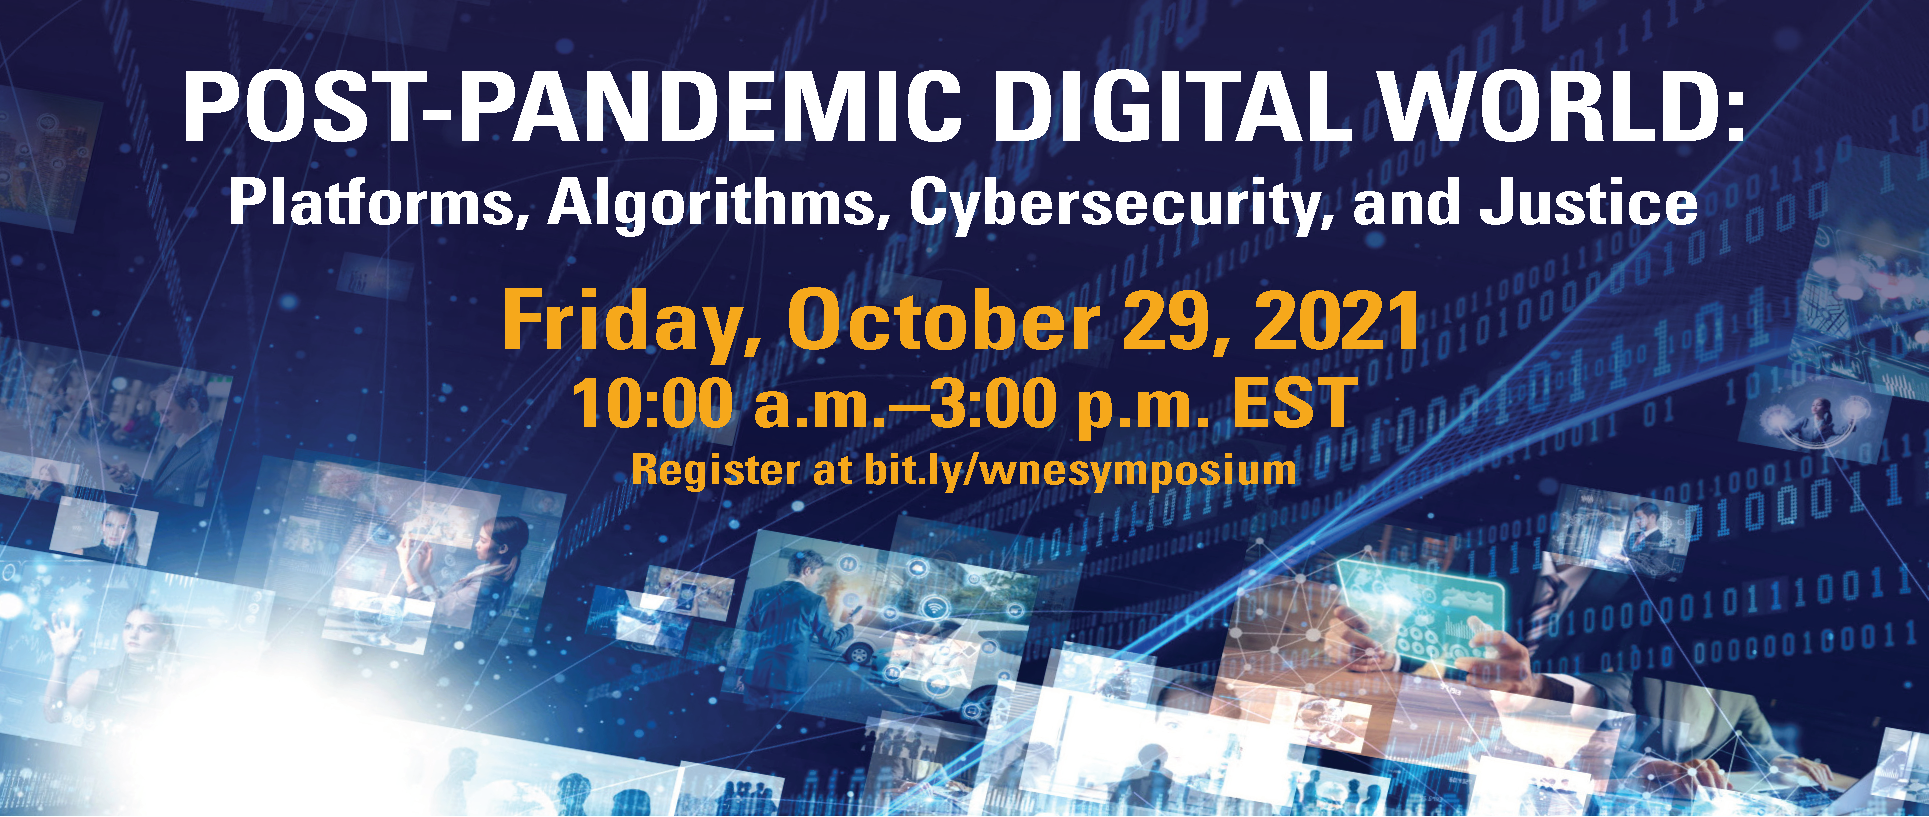 2021 Post-Pandemic Digital World: Platforms, Algorithms, Cybersecurity, and Justice